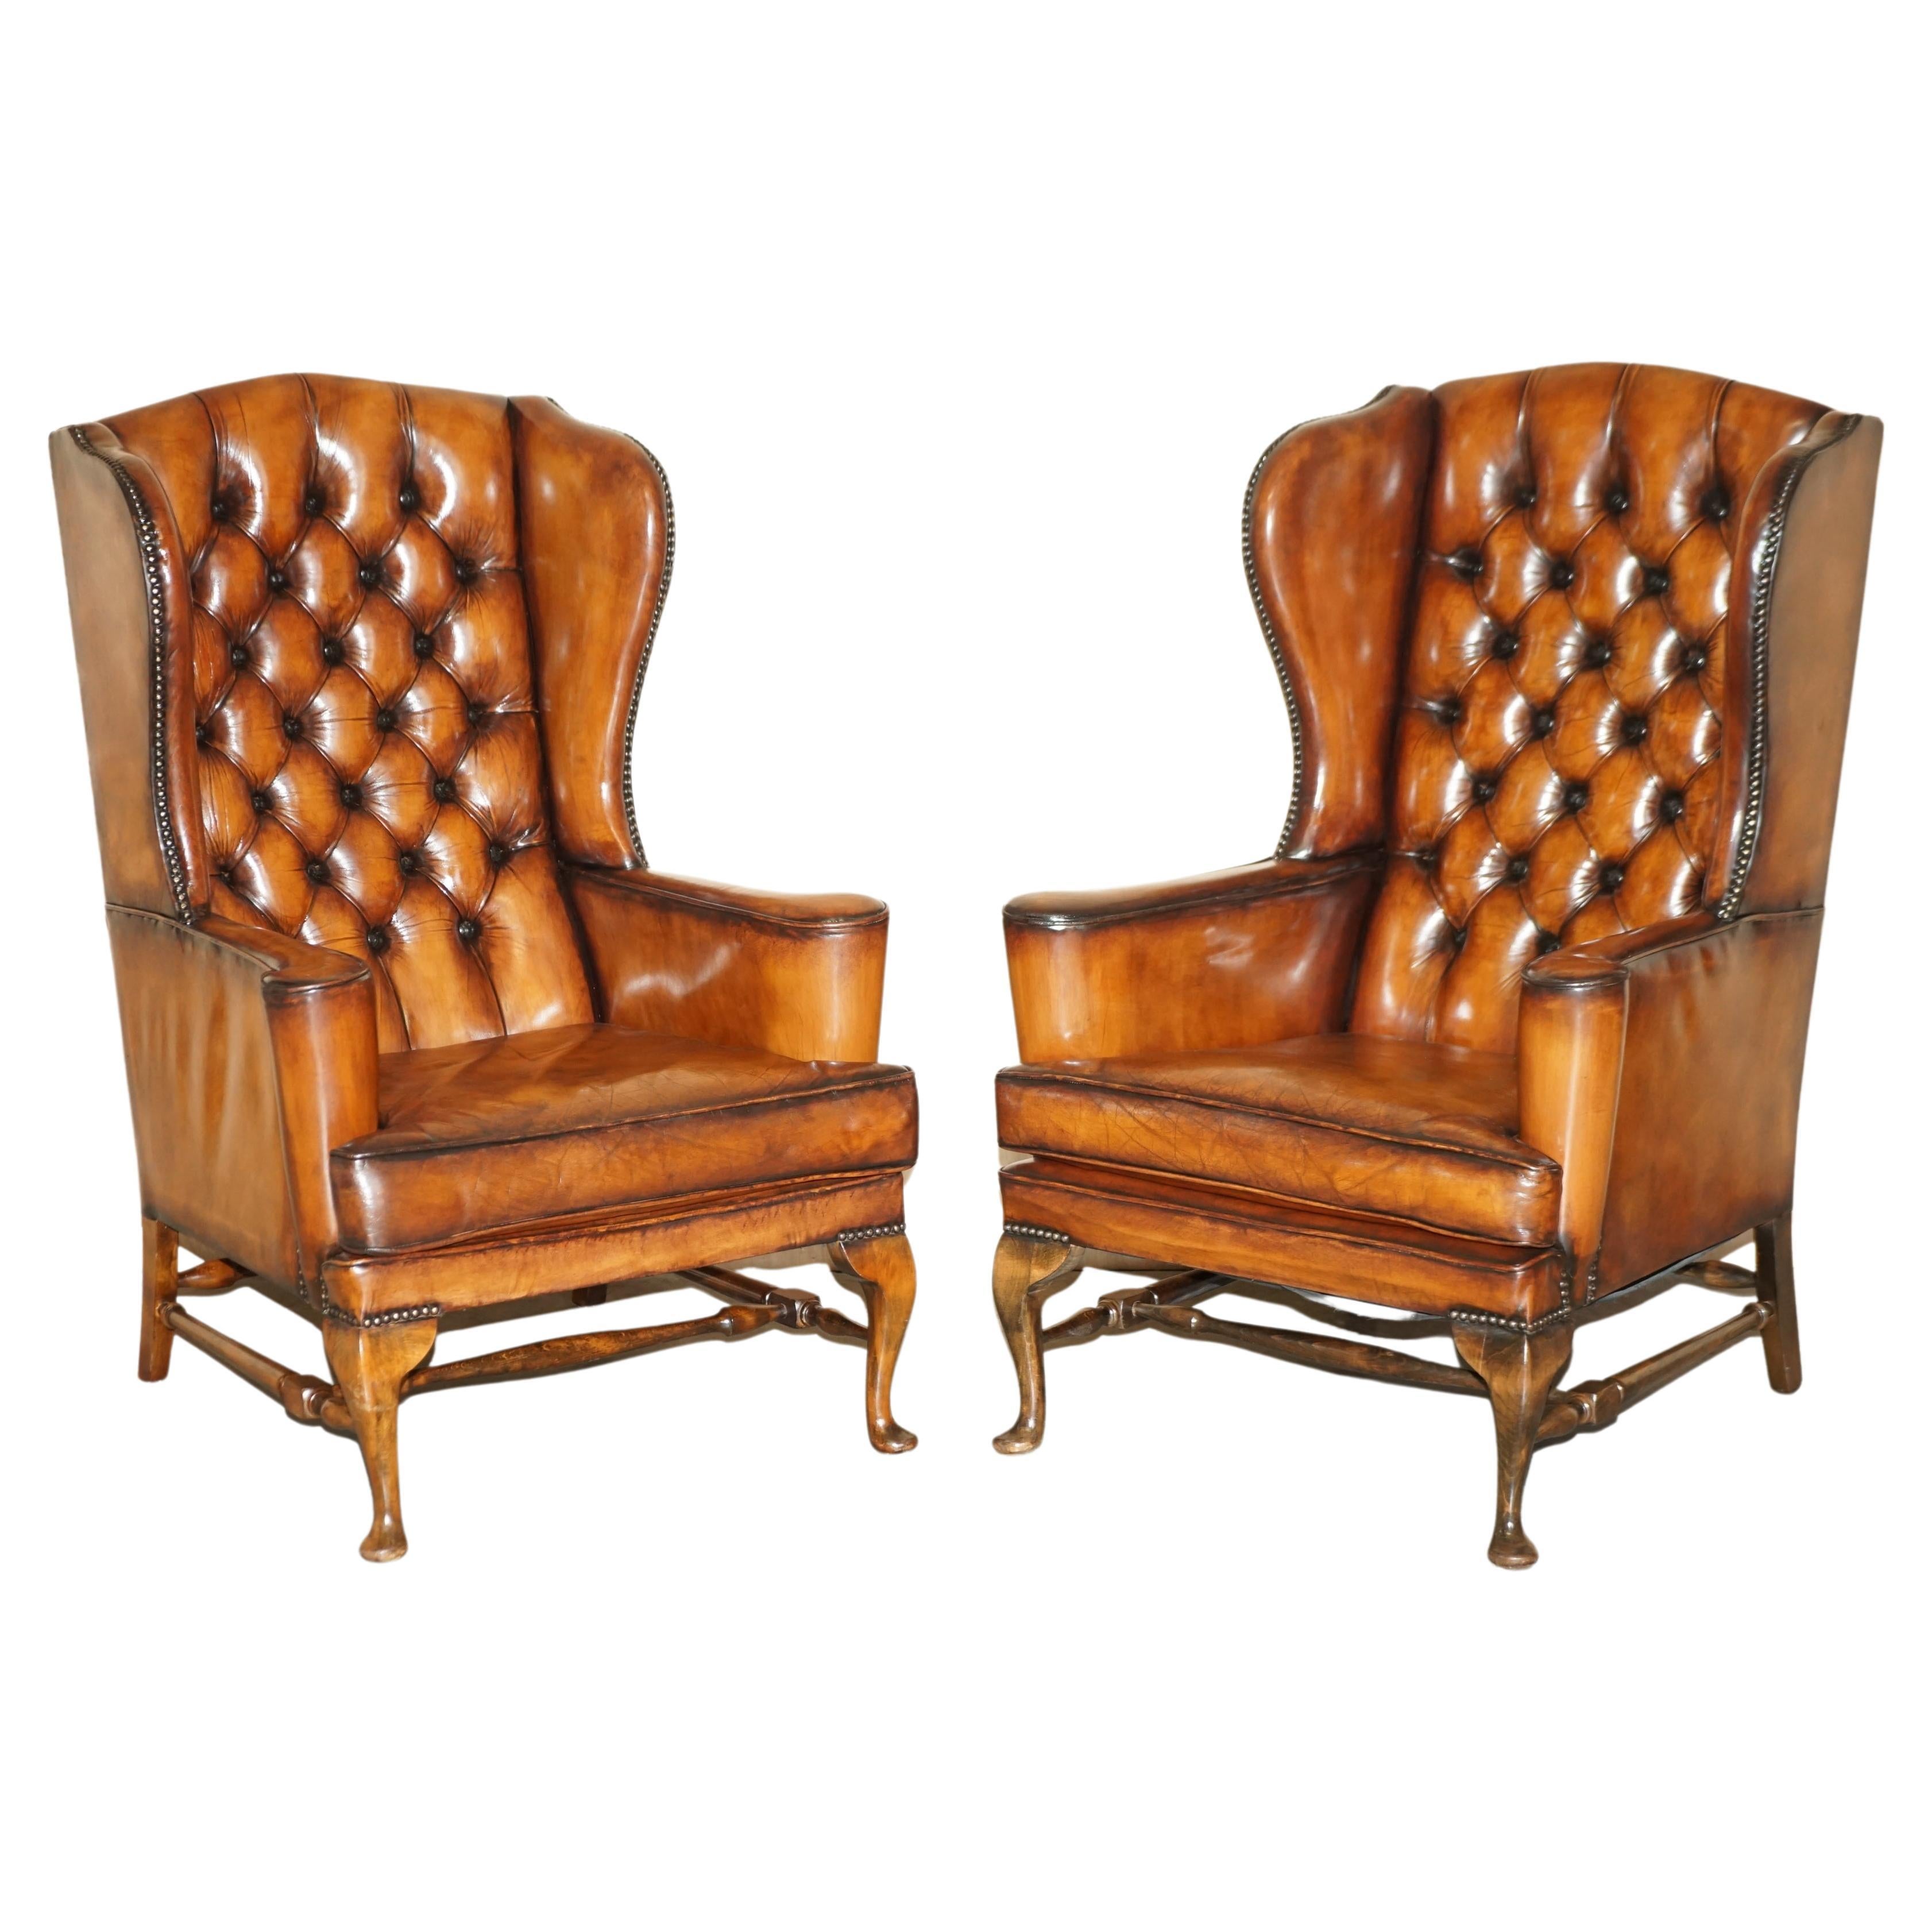 PAIR OF ANTIQUE WILLIAM MORRIS WiNGBACK ARMCHAIRS HAND DYED CIGAR BROWN LEATHER For Sale